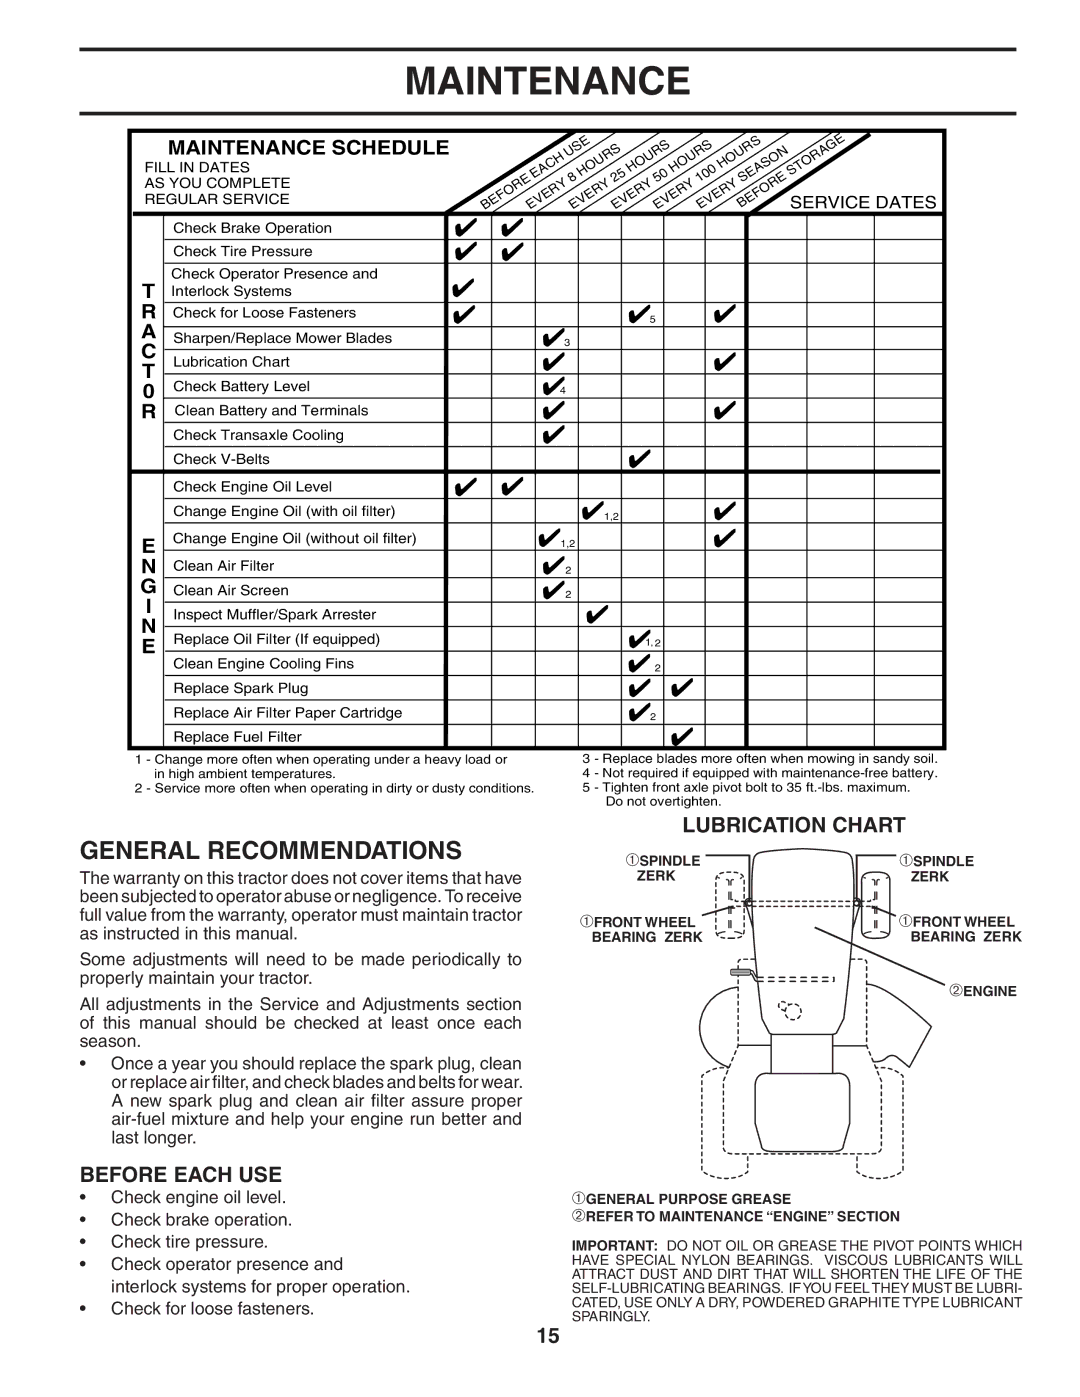 Husqvarna YTH1342XP owner manual Maintenance, General Recommendations, Lubrication Chart, Before Each USE, Service Dates 